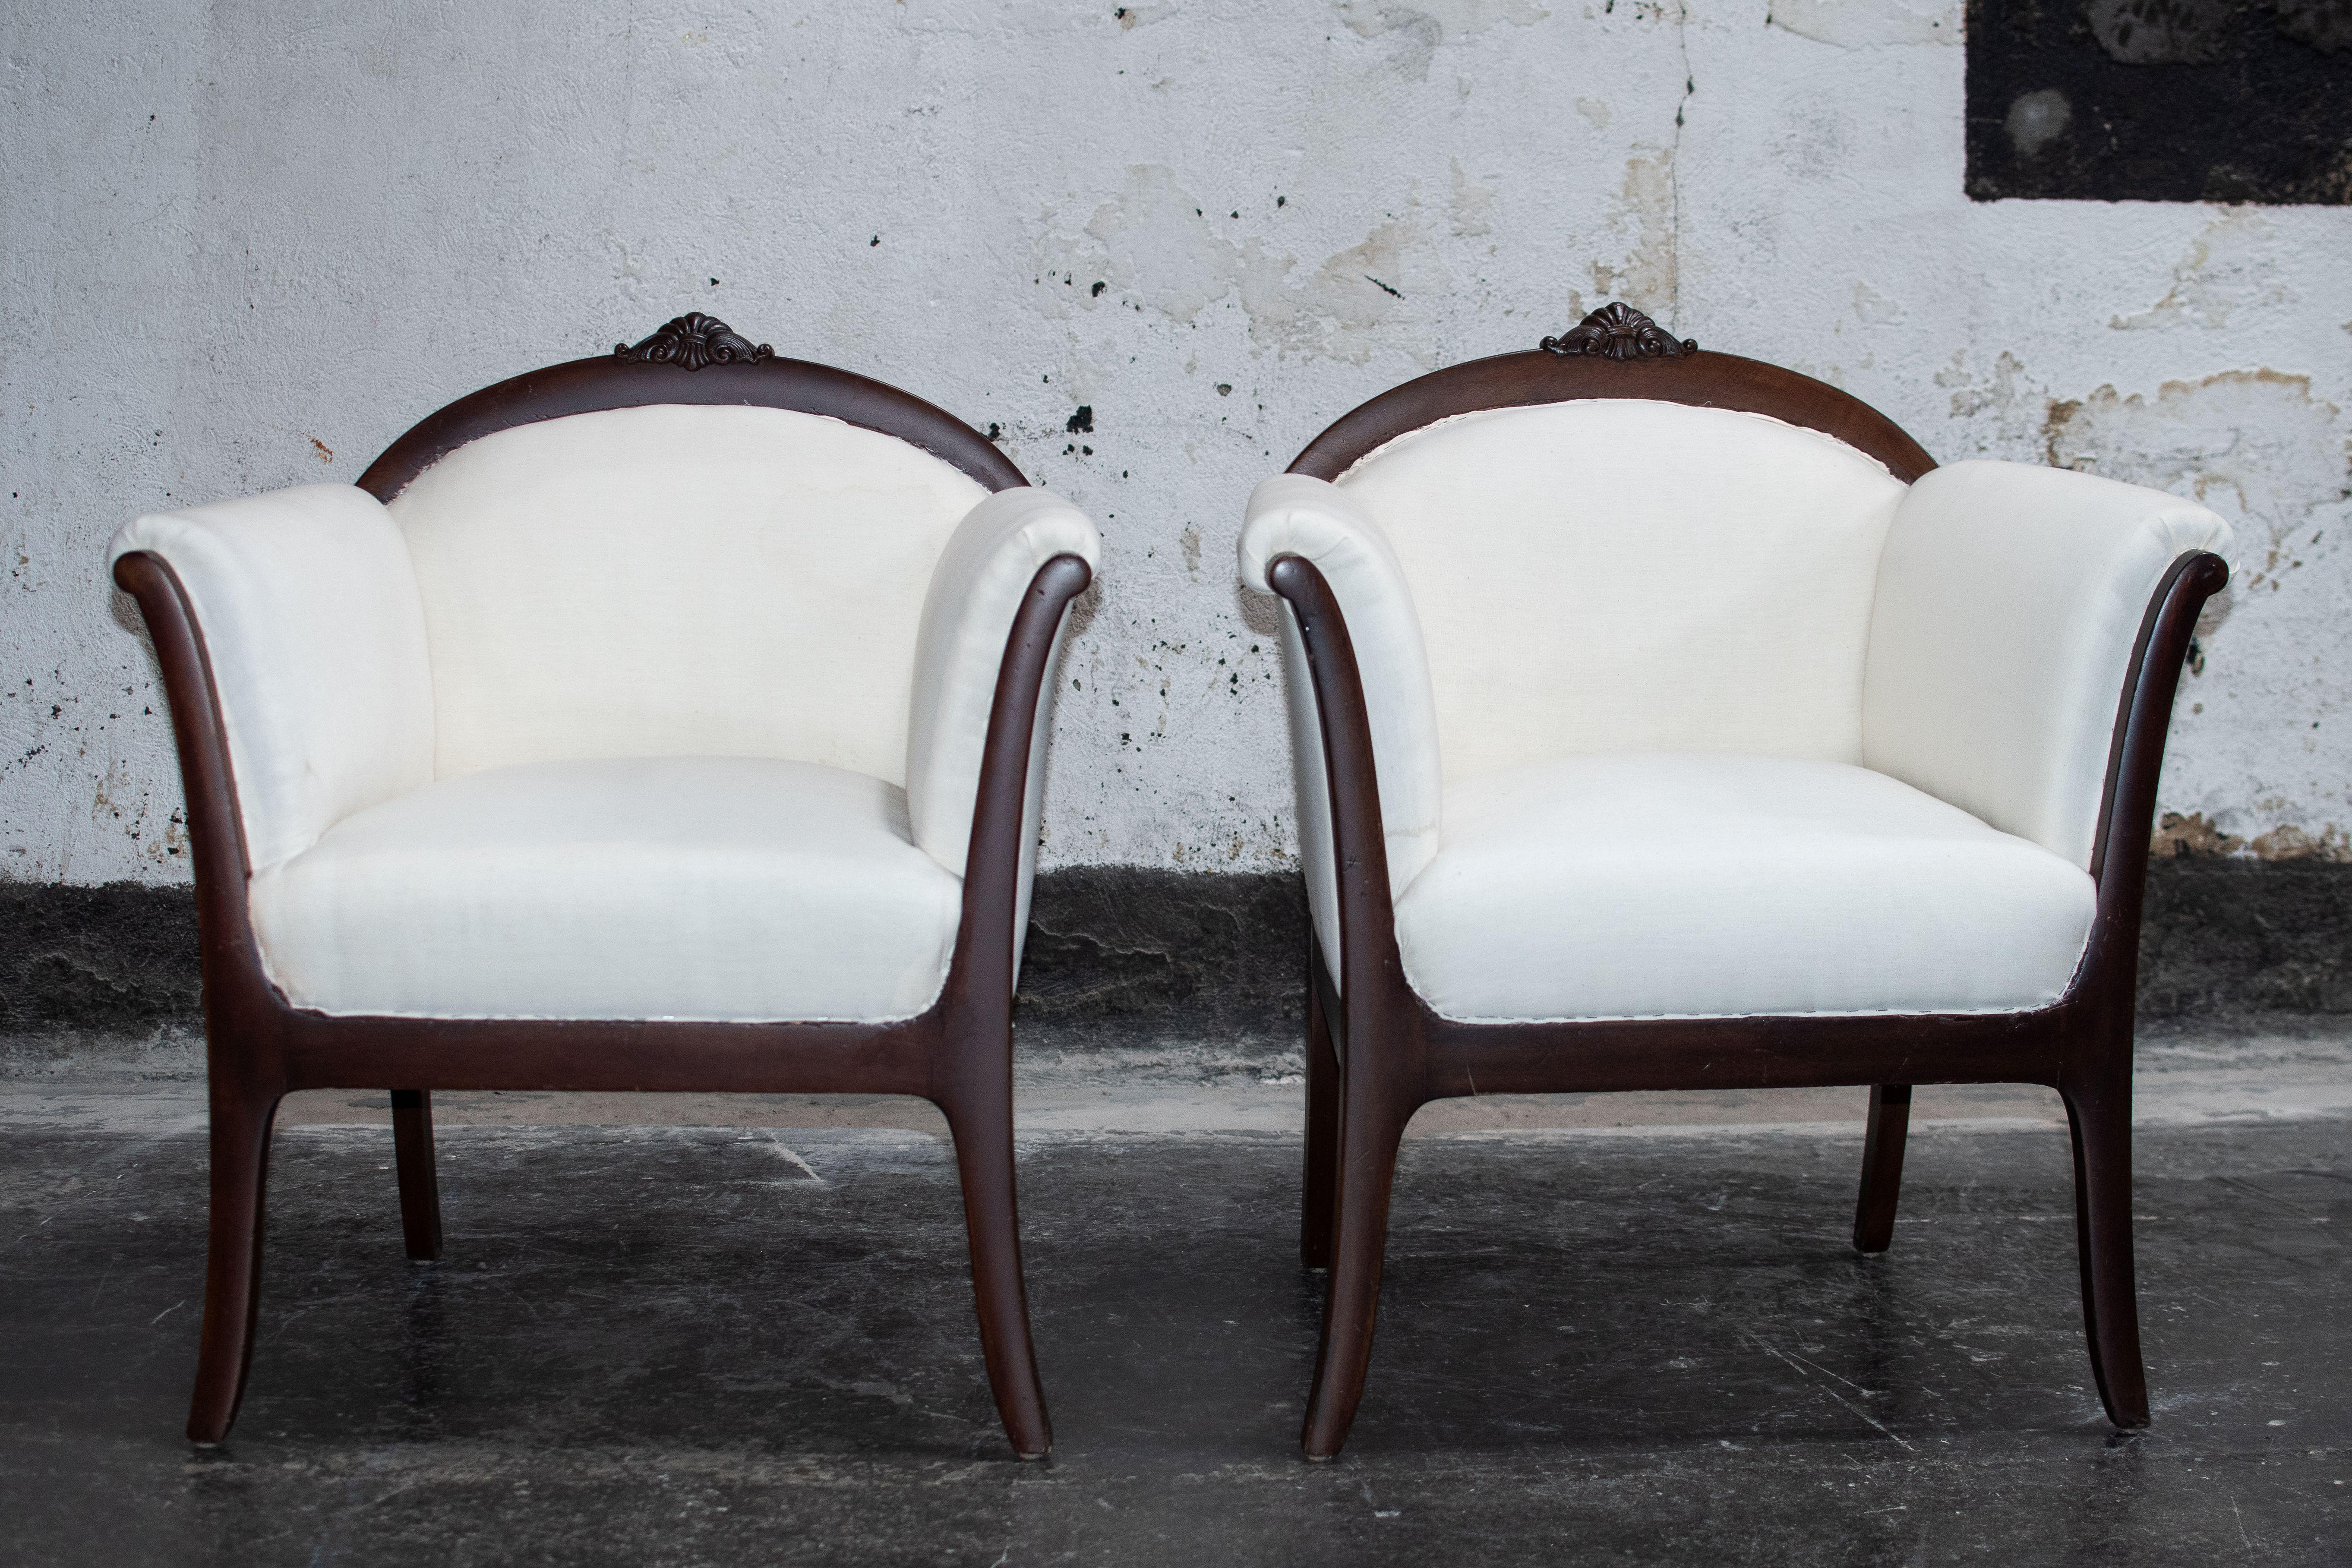 Pair of newly restored antique Swedish Grace arm chairs. Swedish Grace was the brief design period precursing the more commonly identified Scandinavian Modern. It is a delicate balance of neoclassical elements and techniques paired with simplified